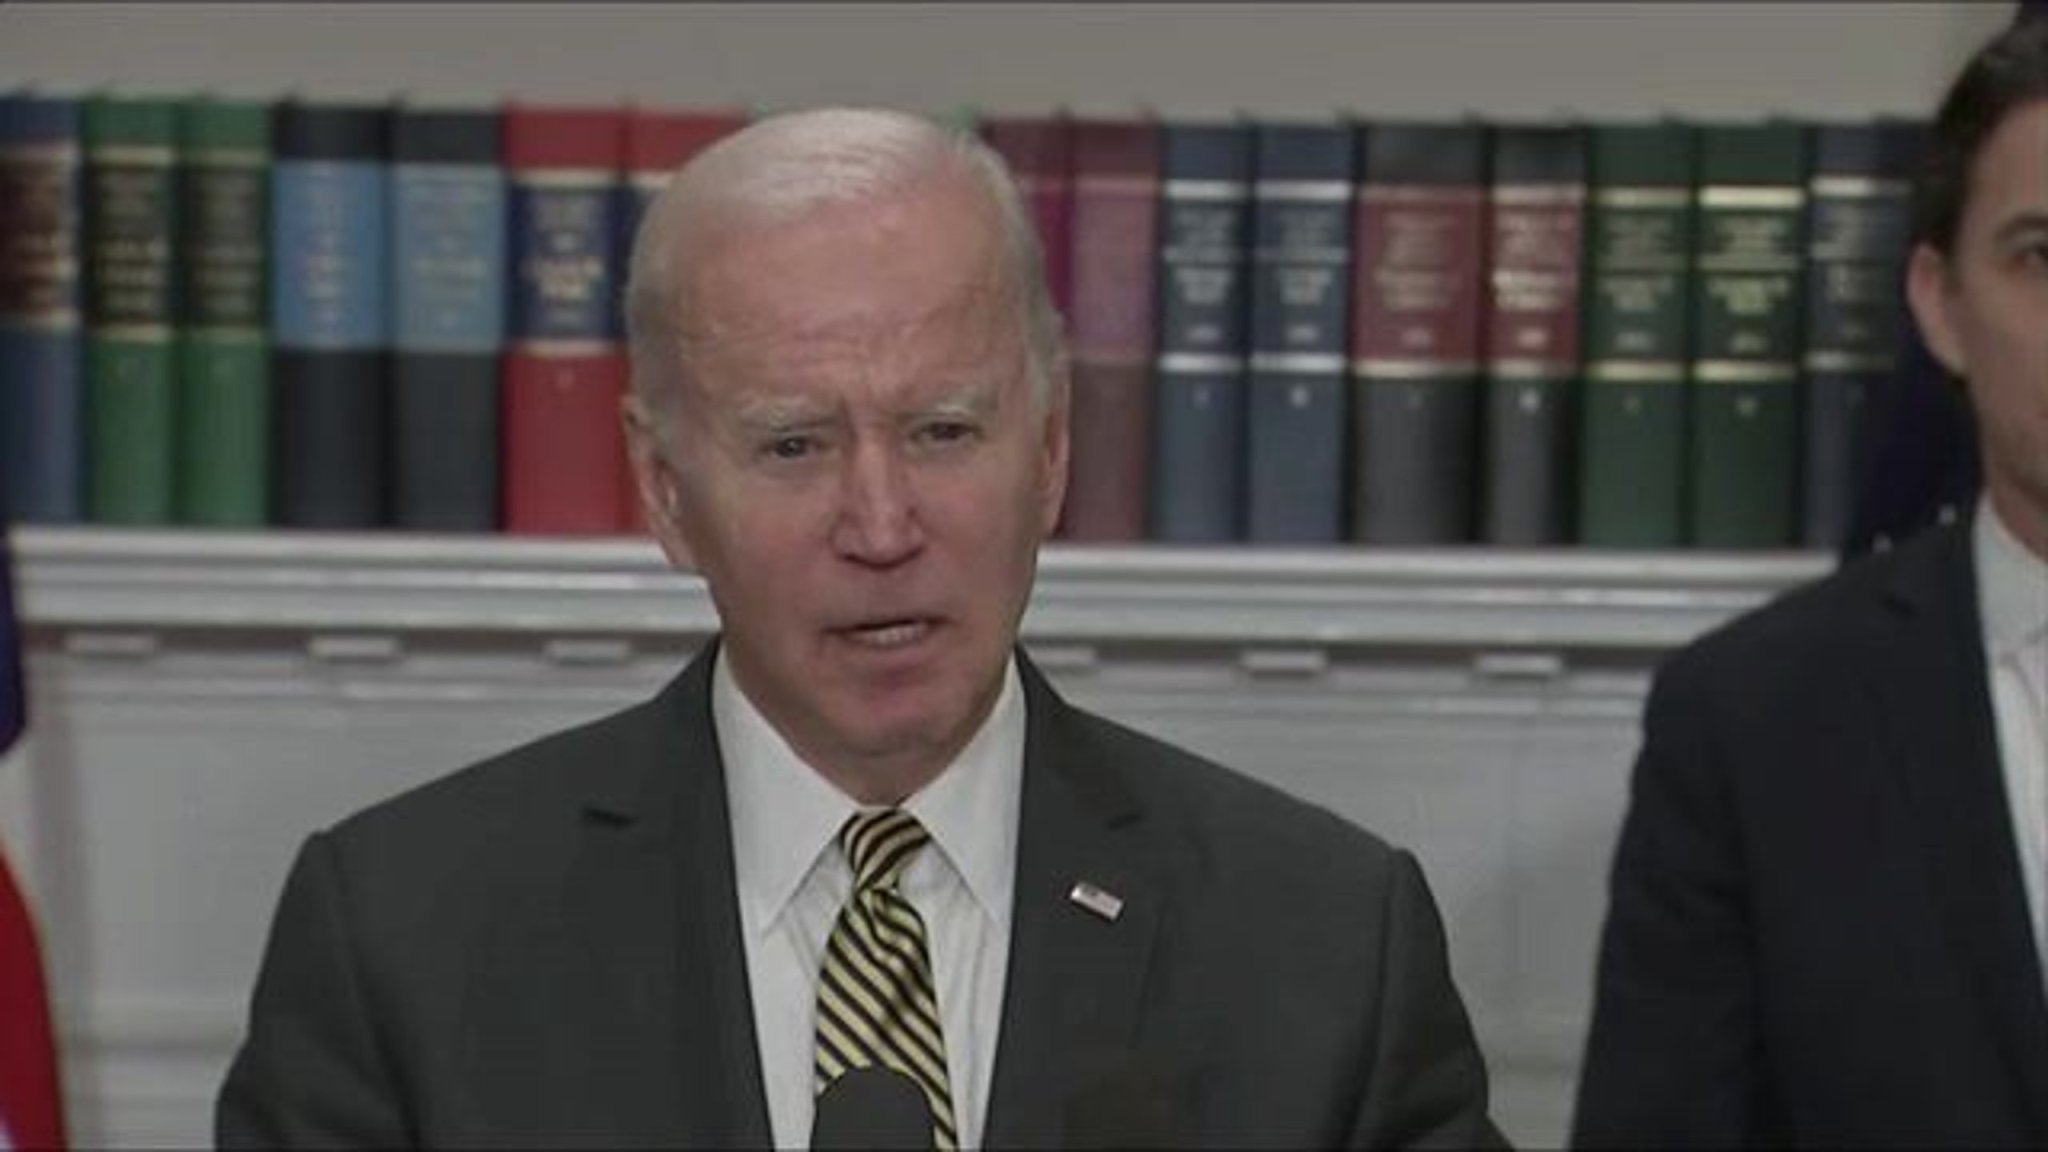 Biden announces the Dept. of Energy will release another 15 million barrels of oil from the Strategic Petroleum Reserve.